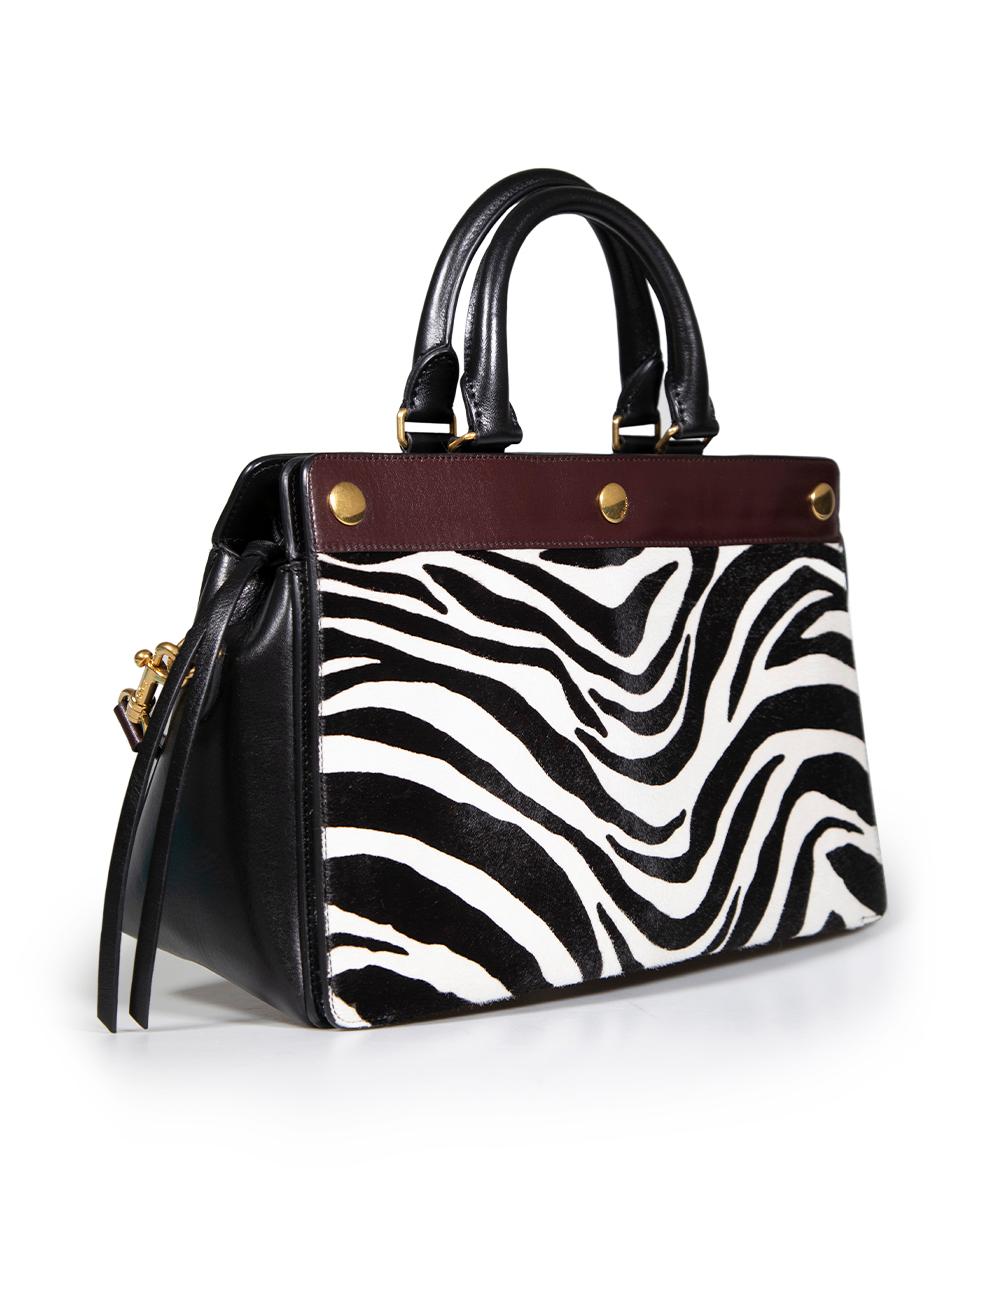 CONDITION is Never worn, with tags. No visible wear to bag is evident on this new Mulberry designer resale item. This bag comes with original dust bag.
 
 Details
 Model: Chester
 Black
 Leather
 Medium handbag
 Zebra print ponyhair front panel
